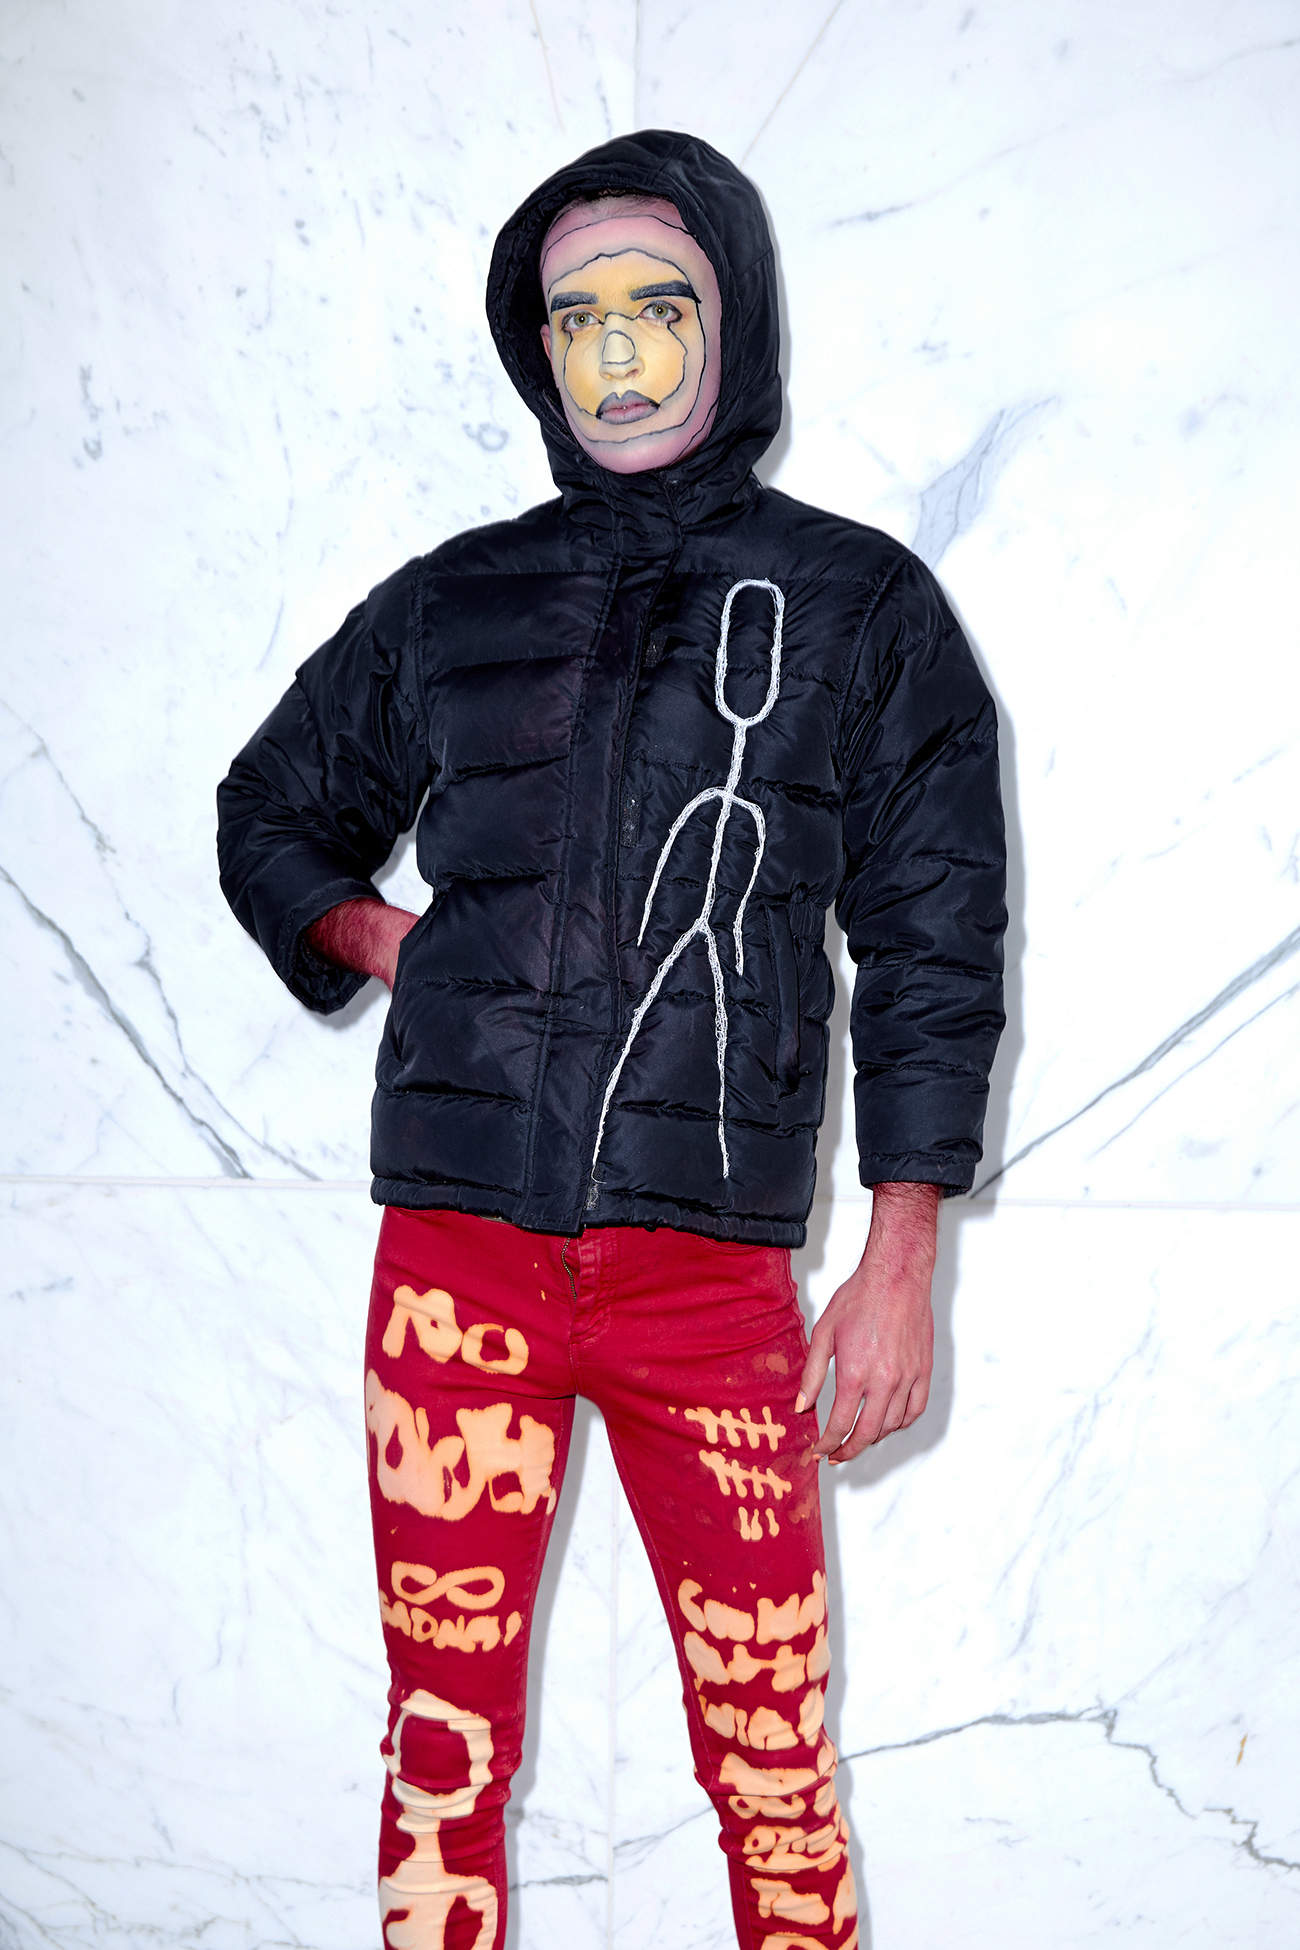 Jesse with red and yellow facepaint wearing a black puffer jacket against a marble background